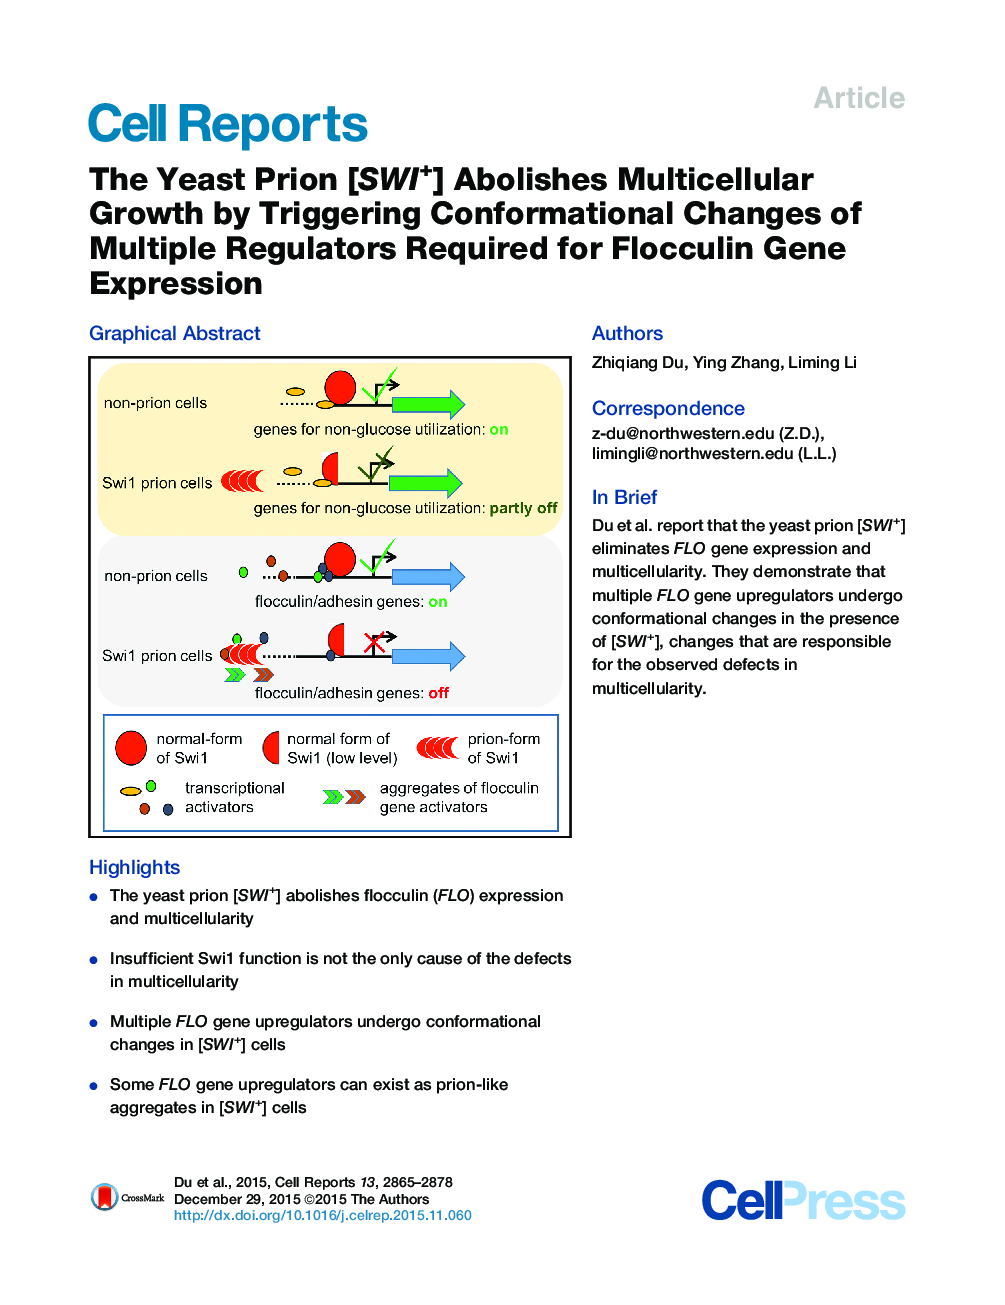 The Yeast Prion [SWI+] Abolishes Multicellular Growth by Triggering Conformational Changes of Multiple Regulators Required for Flocculin Gene Expression 